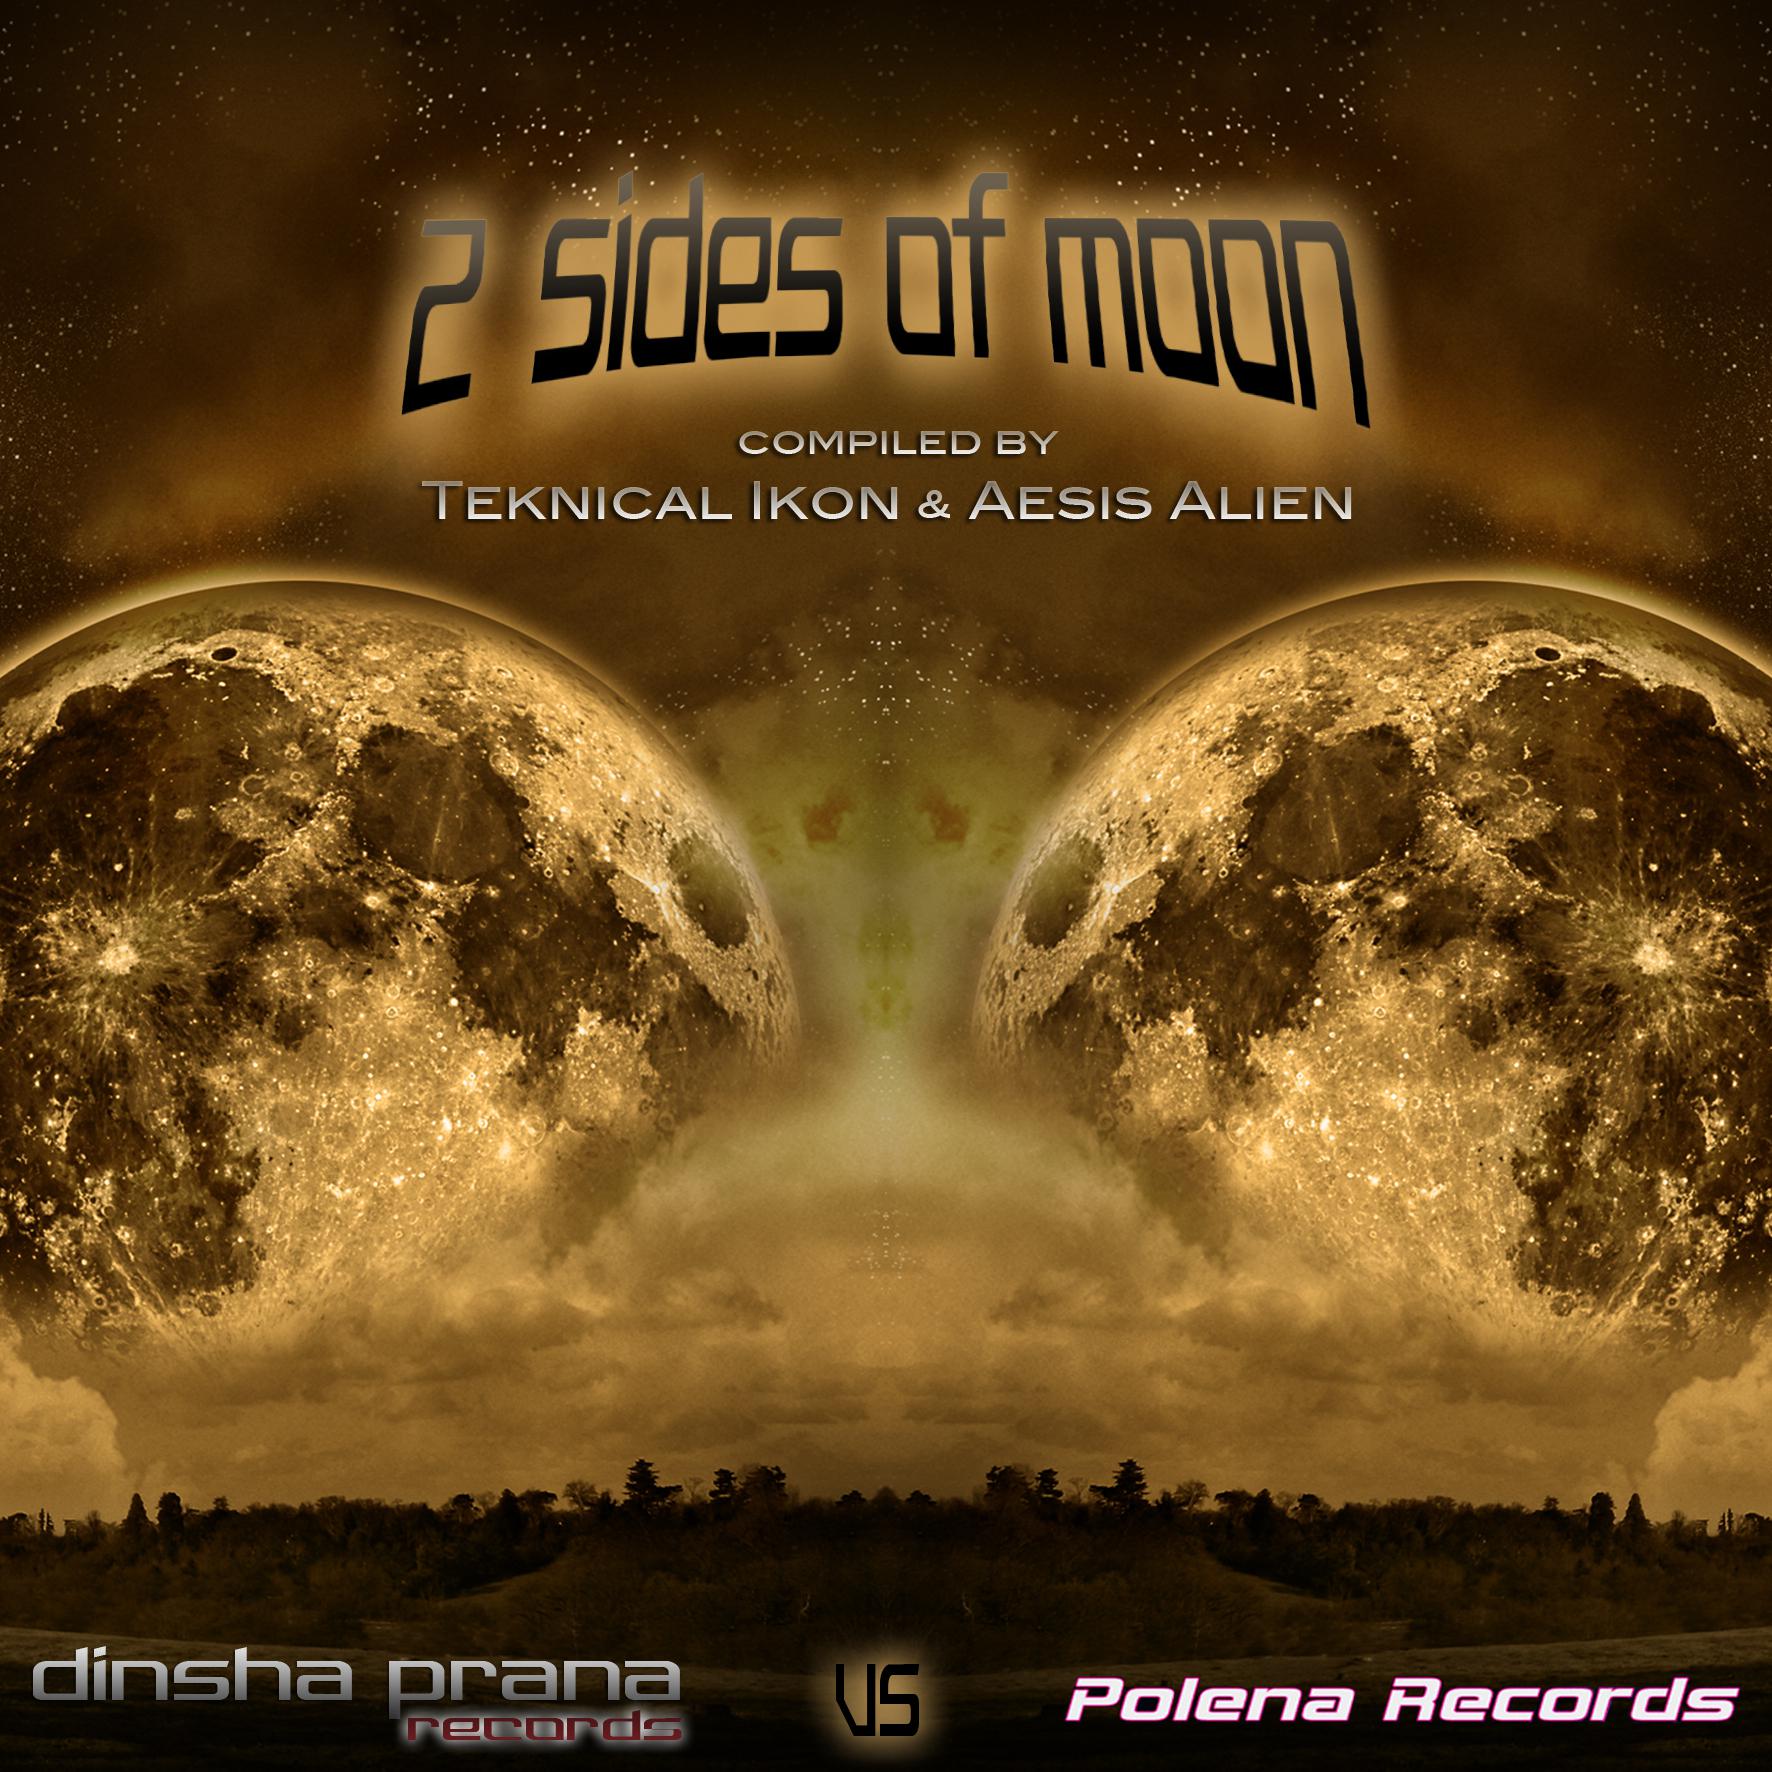 2 Sides of Moon: Compiled by Teknical Ikon & Aesis Alien